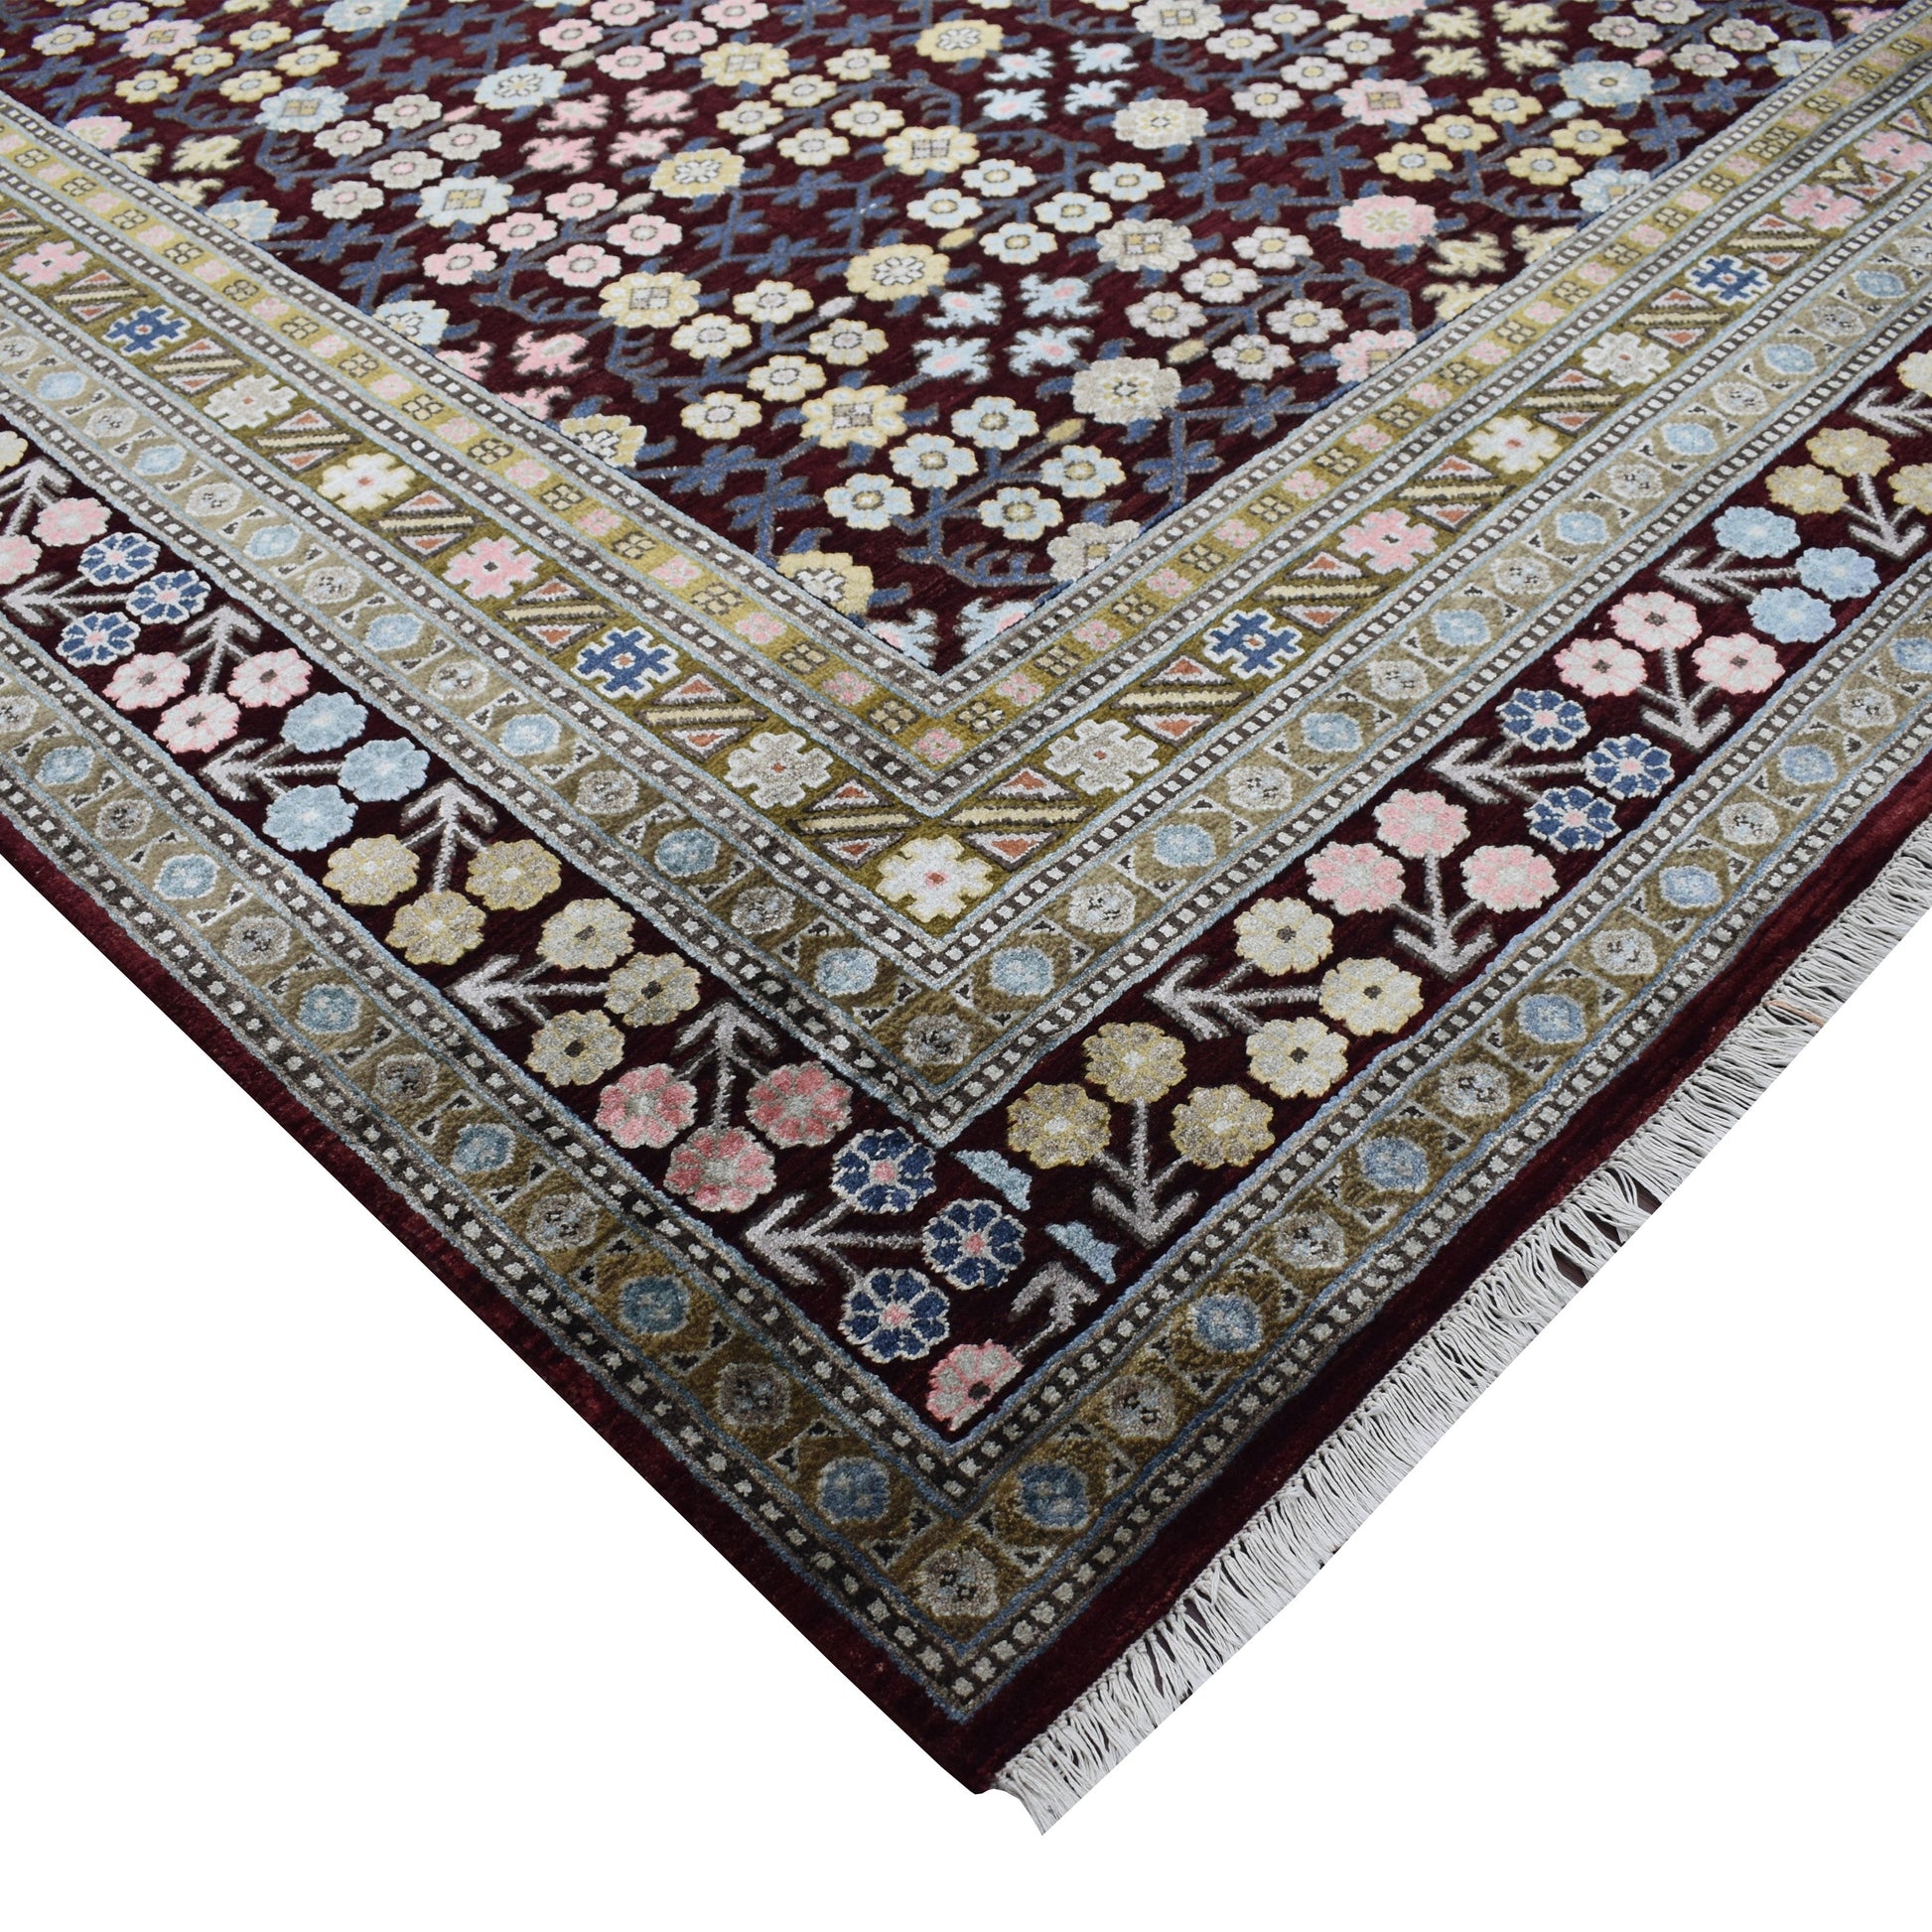 Get trendy with Bouquet Samarkand Red, Camel and Multy Transitional Silk and Wool  Handknotted Area Rug - Transitional Rugs available at Jaipur Oriental Rugs. Grab yours for $5899.00 today!